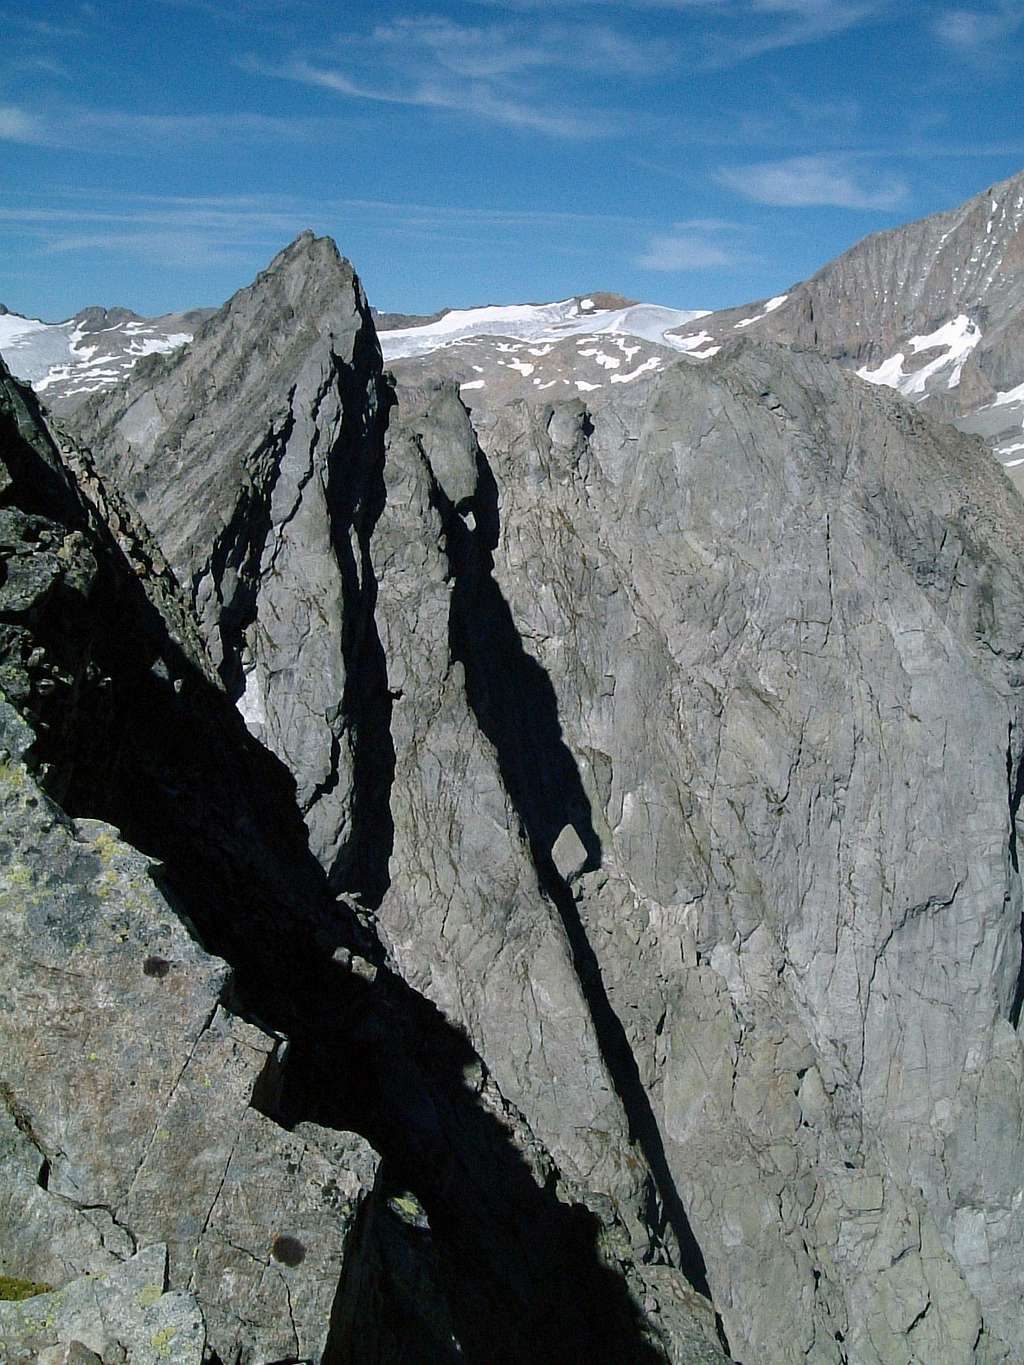 Summitview from Wiwannihorn